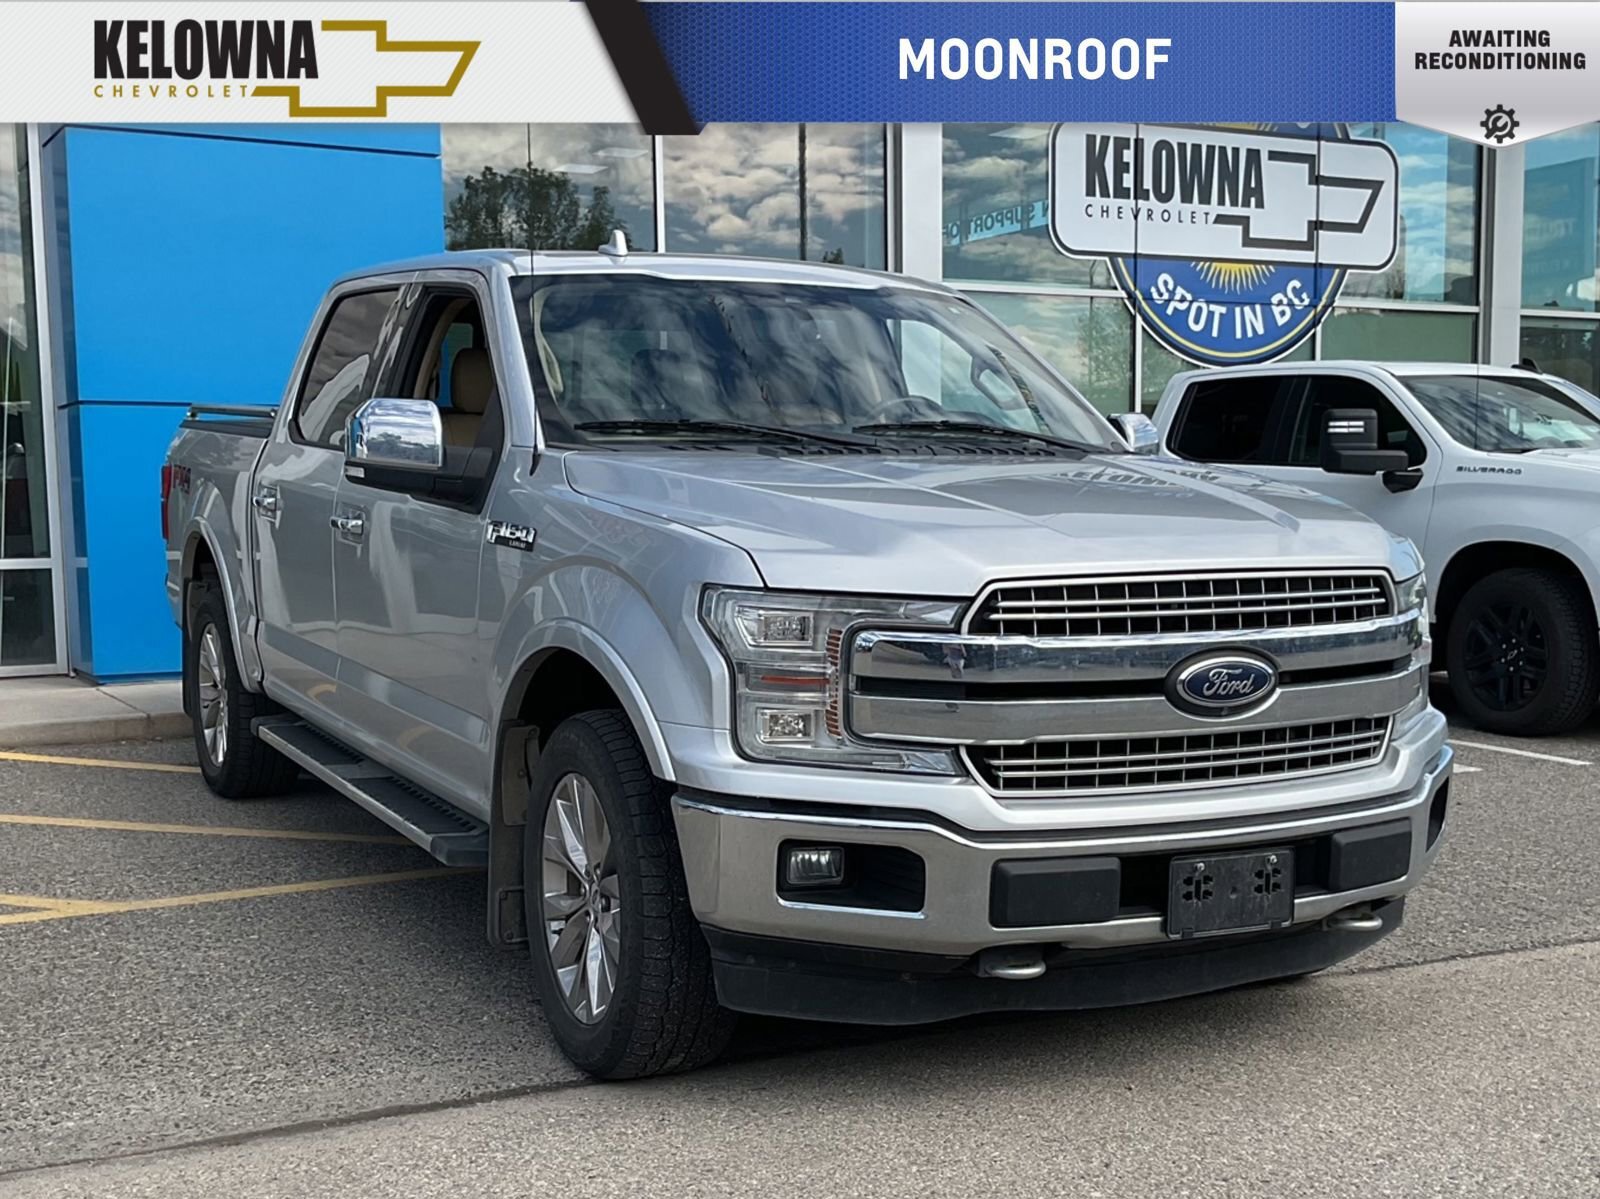 2018 Ford F-150 LARIAT 4WD